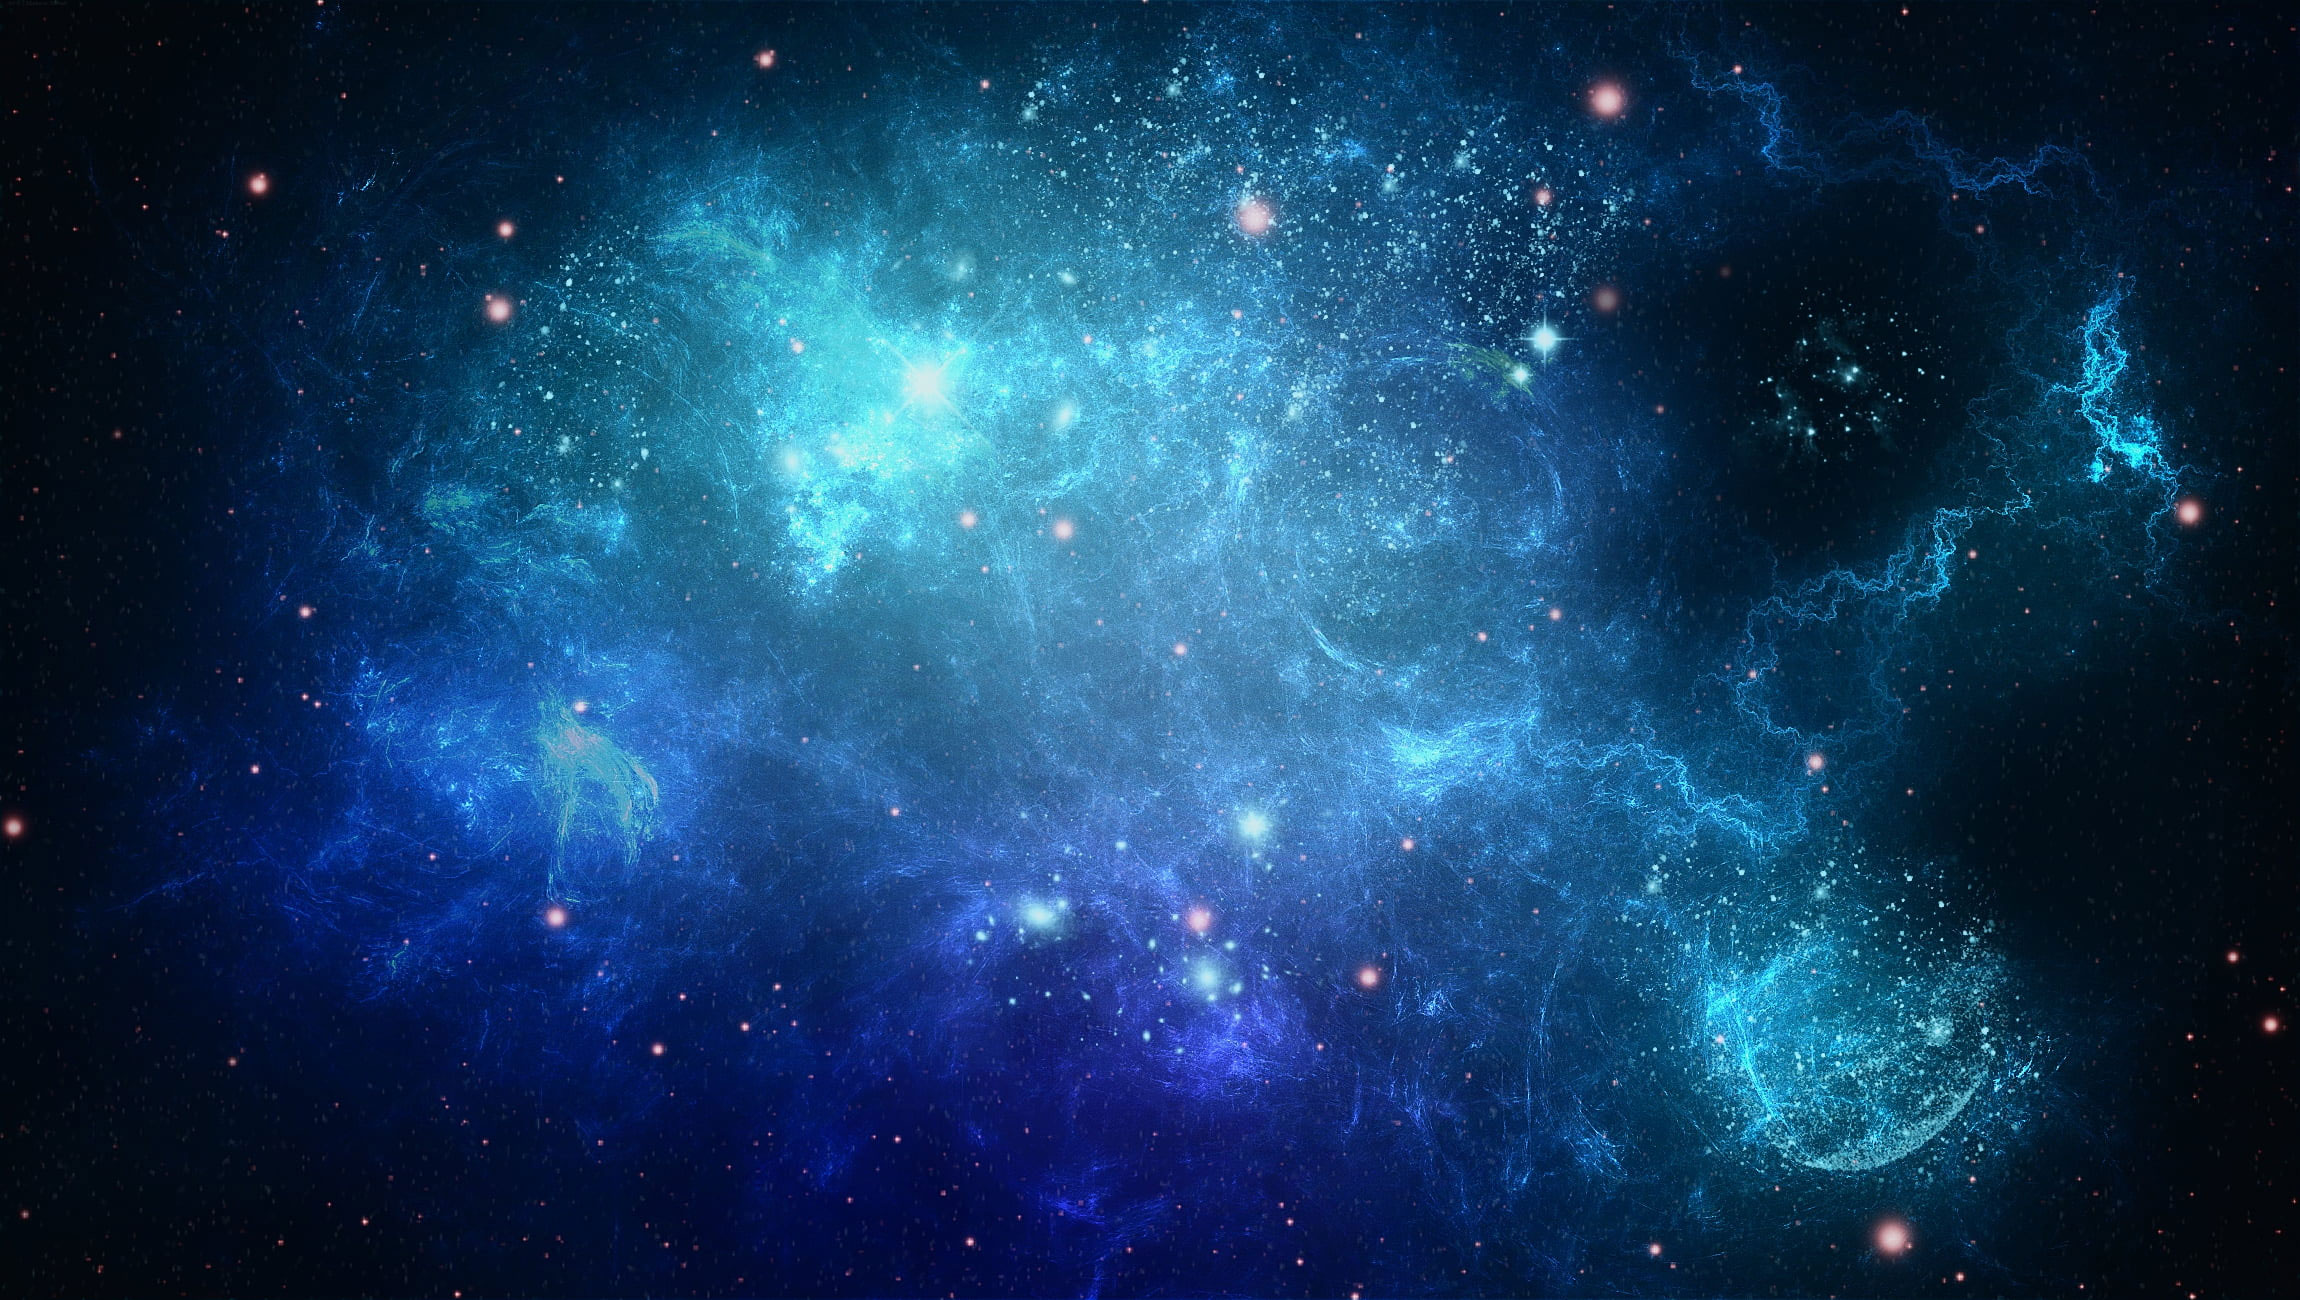 Wallpaper Galaxy Illustration, Space, Background, Blue